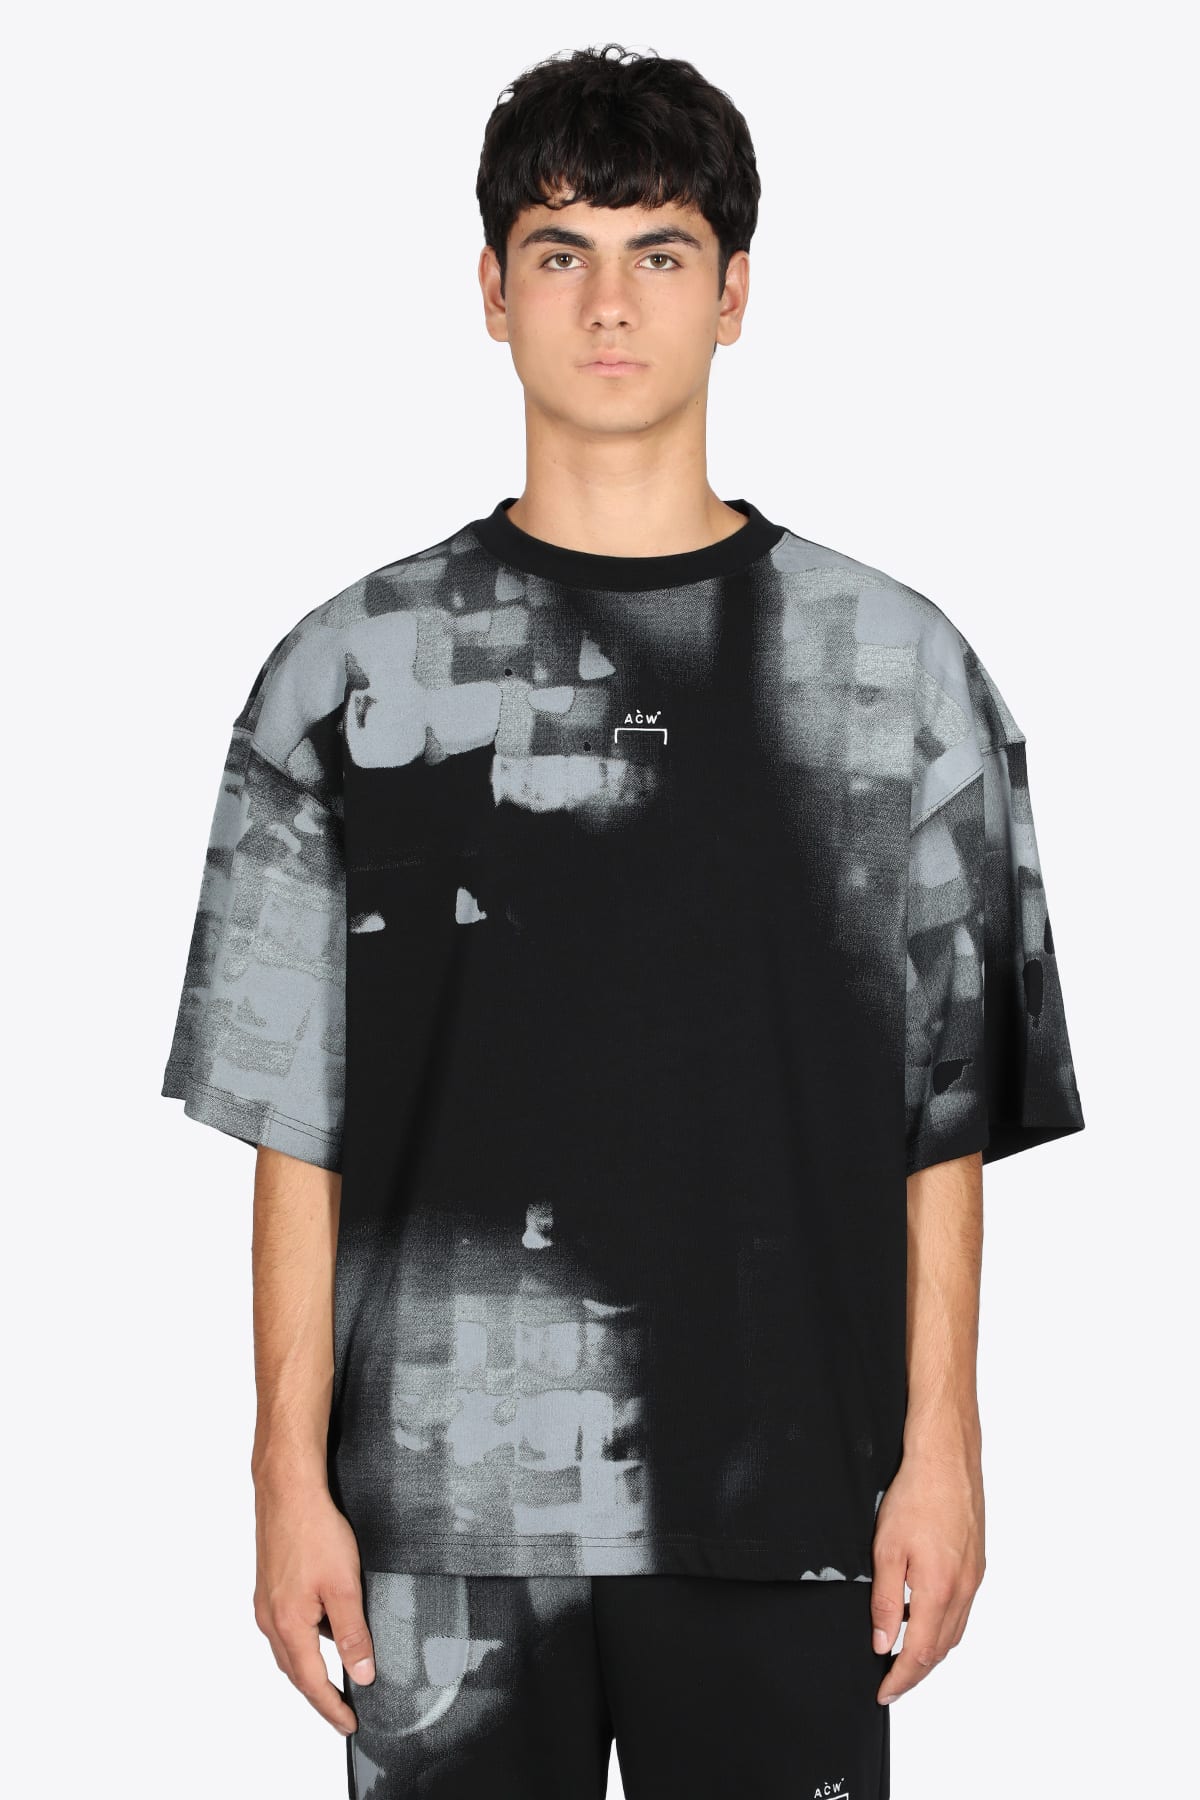 A-COLD-WALL Brush Stroke Ss T-shirt Black cotton t-shirt with abstract print